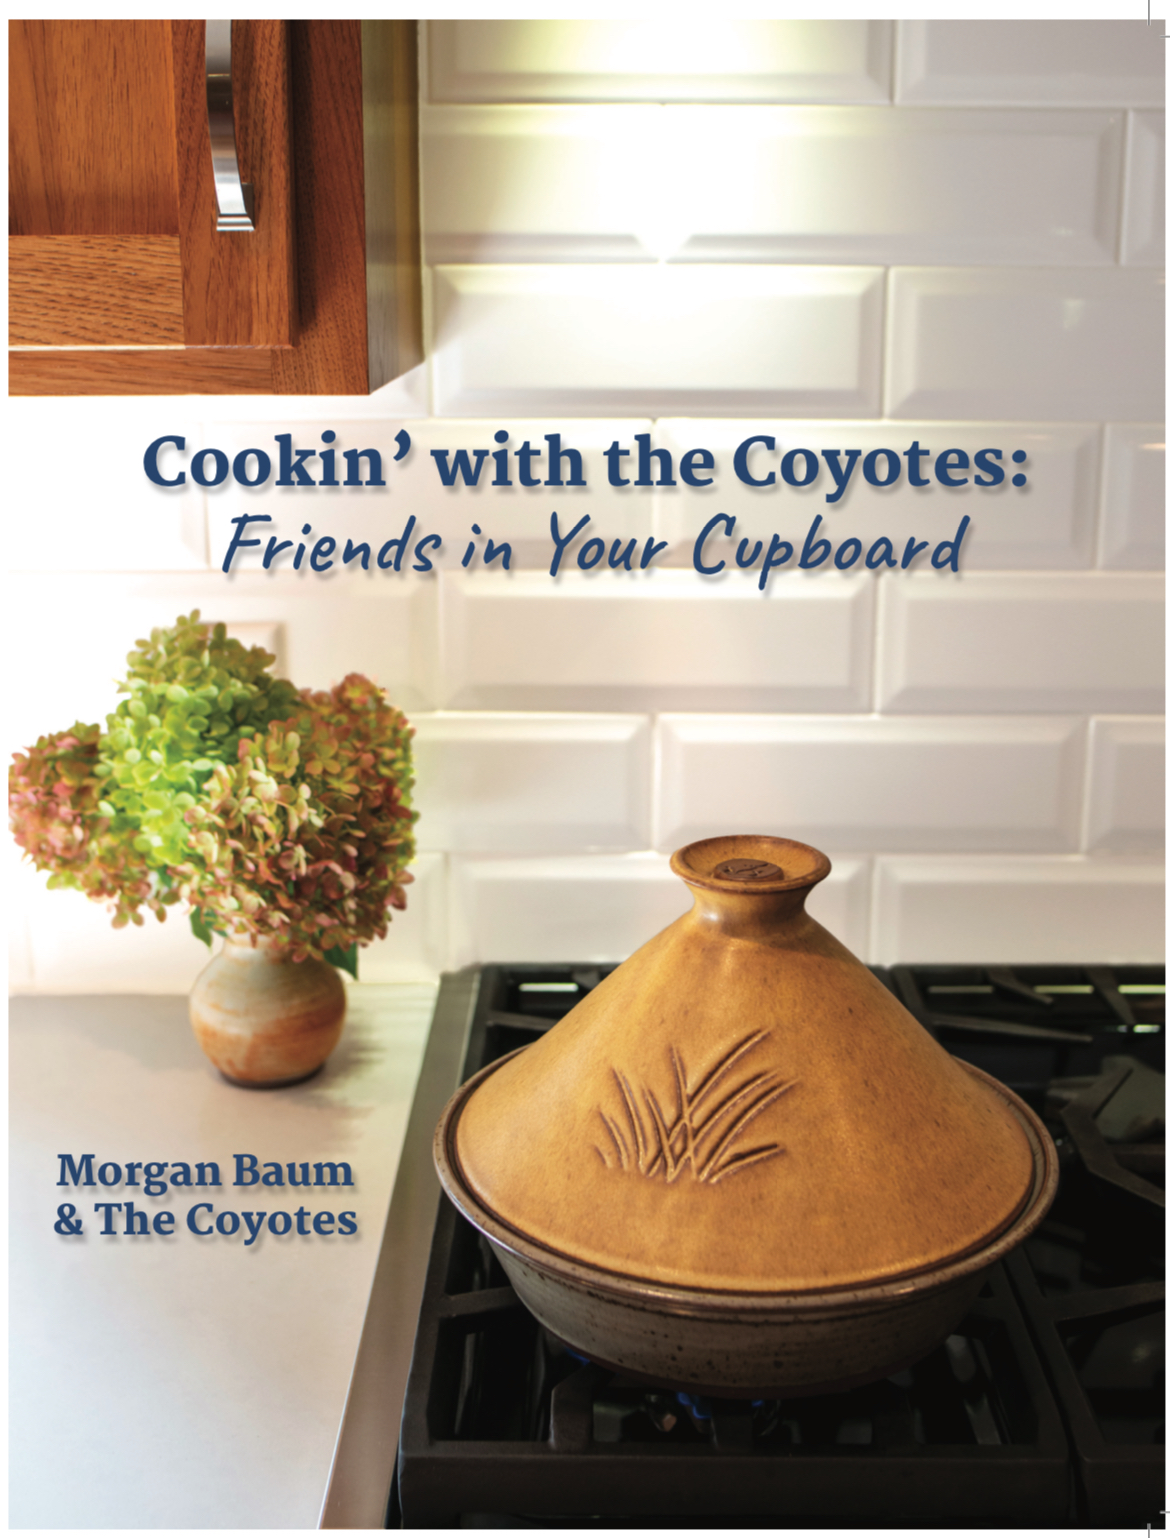 Clay Coyote Dutch Oven and Cookbook